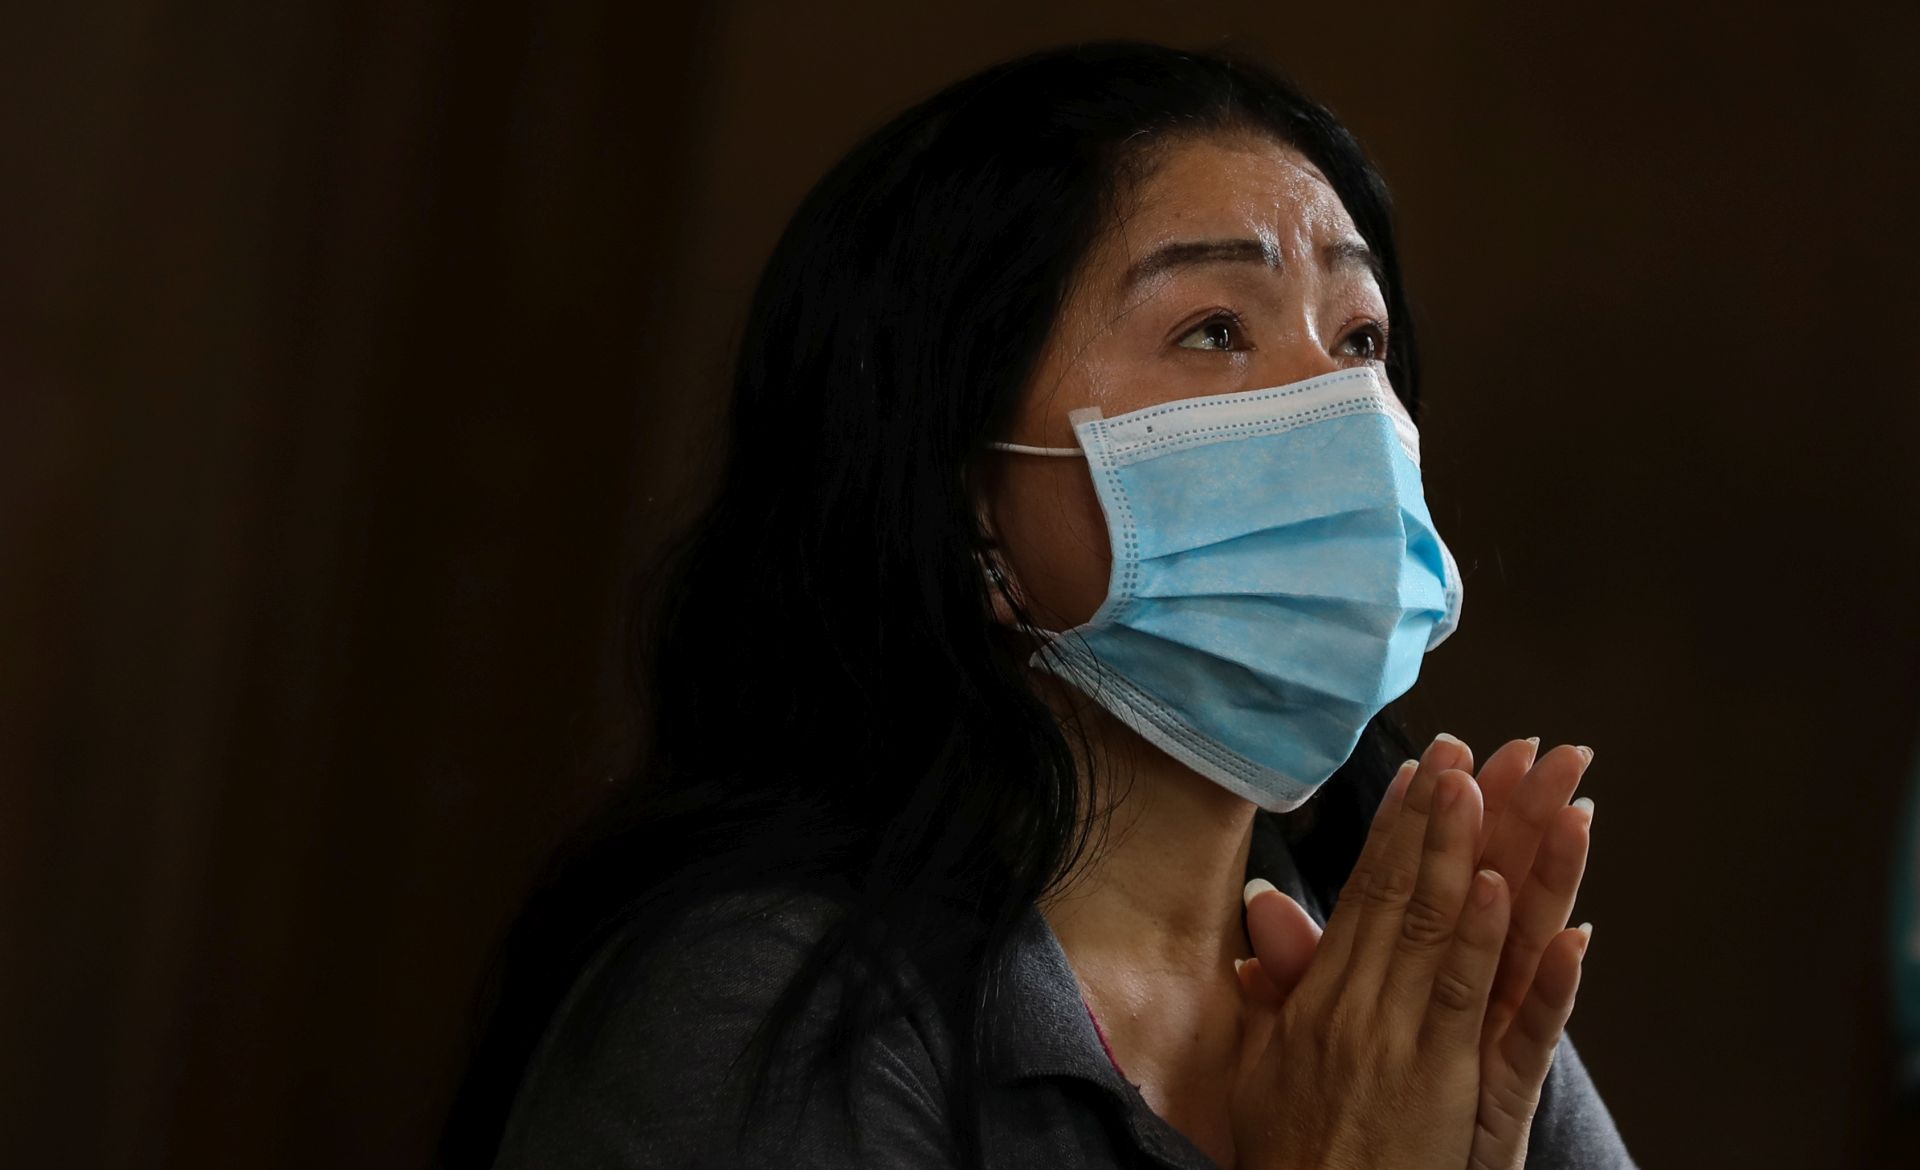 epa08285021 A woman wearing a mask prays inside the Baclaran Church in Paranaque, south of Manila, Philippines, 11 March 2020. Philippine President Rodrigo Duterte on 09 March placed the country under a state of public health emergency amid the coronavirus outbreak. Philippine health officials have confirmed 33 cases of coronavirus so far.  EPA/MARK R. CRISTINO